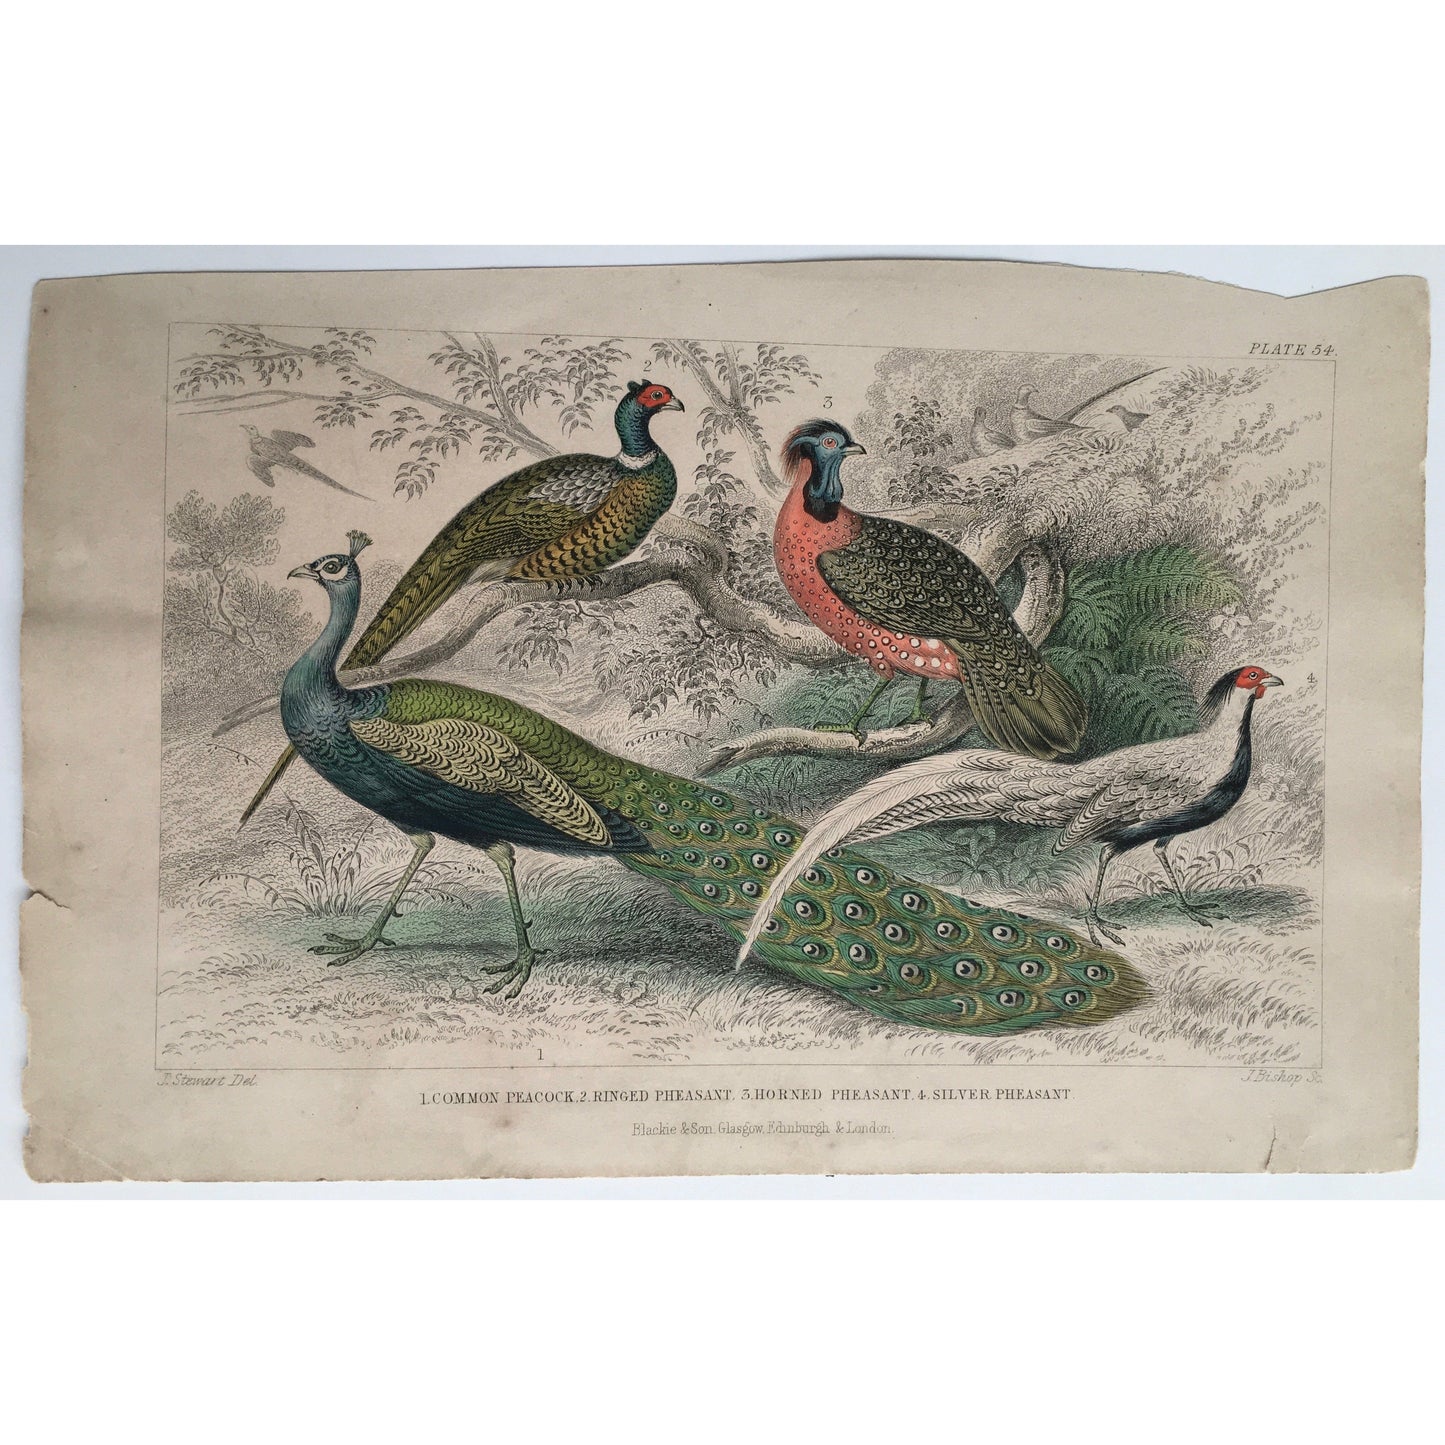 Peacock, Common Peacock, Pheasant, Ringed Pheasant, Horned Pheasant, Silver Pheasant, Bird, Birds, Ornithology, Oliver Goldsmith, Goldsmith, Natural History, Animals, Wildlife, A History of the Earth and Animated Nature, Nature, Blackie & Son, Blackie and Son, 1852, Coloured Colorful, J. Stewart, J. Bishop, Stewart, Bishop, Antique Prints, Old Books, Rare Prints, Rare Books, Original, Engravings, Art, Decor, Design, Engraving, Birds, 